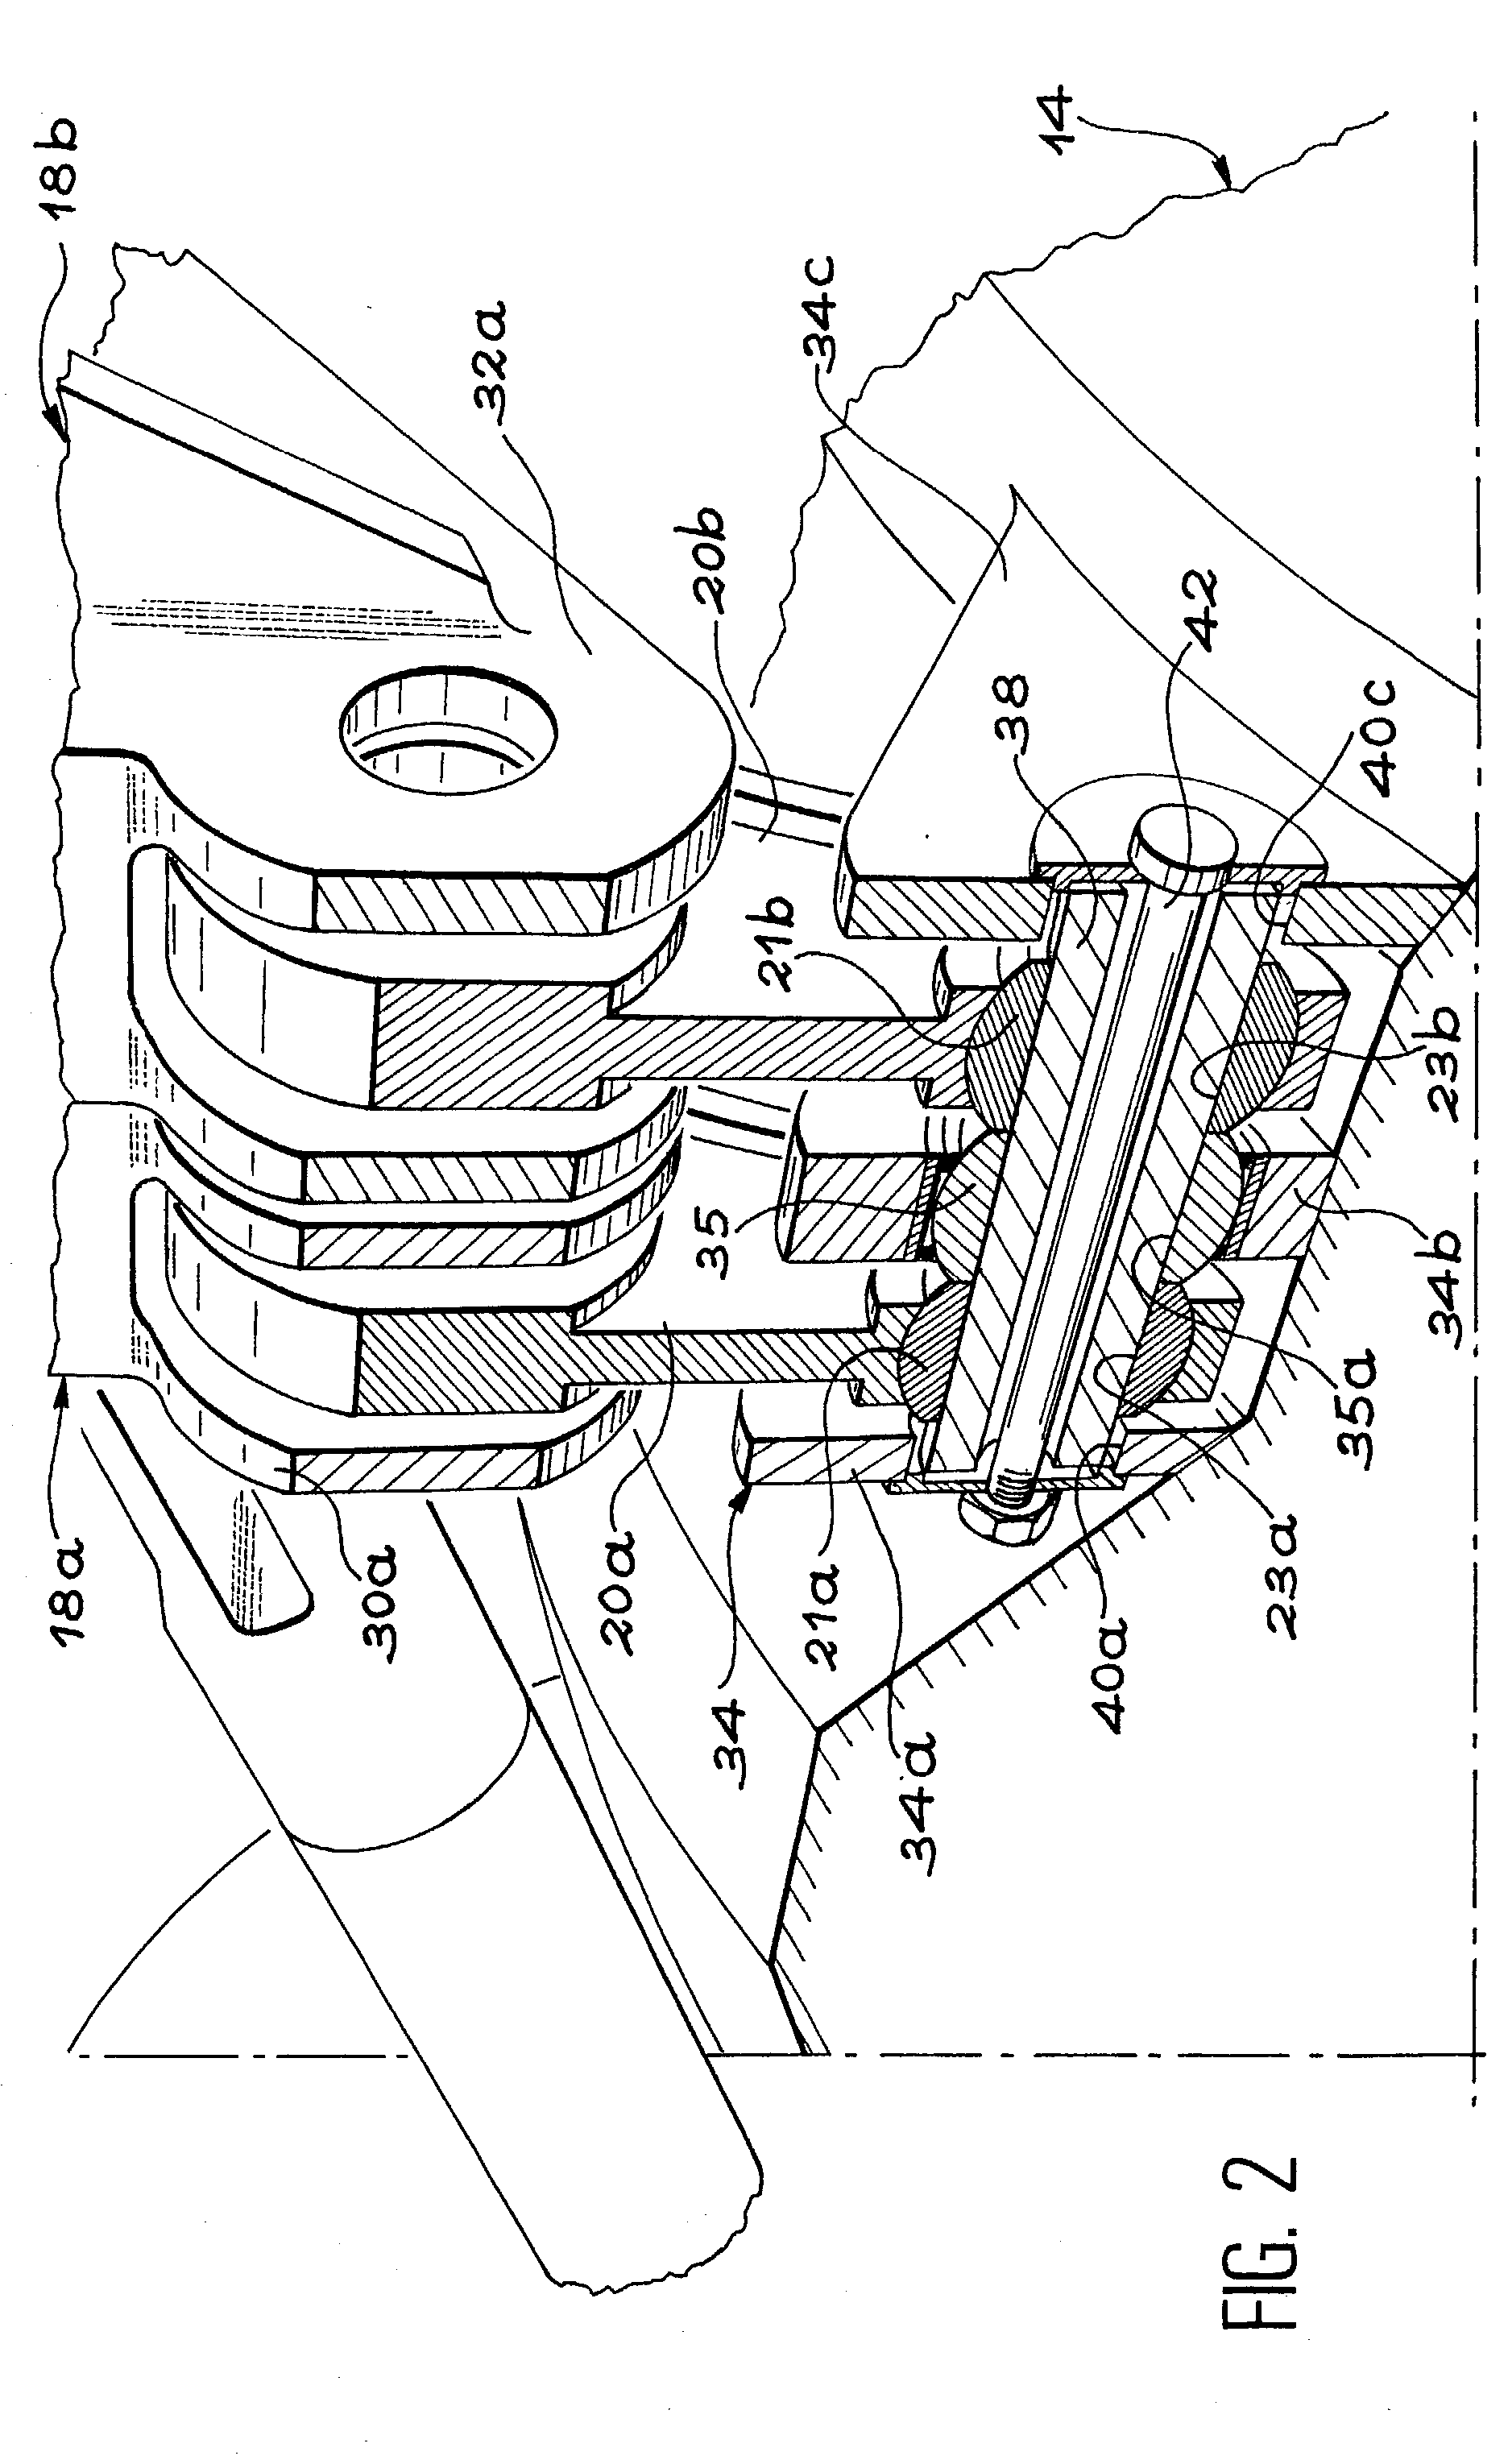 Device for the attachment of an engine to an aircraft